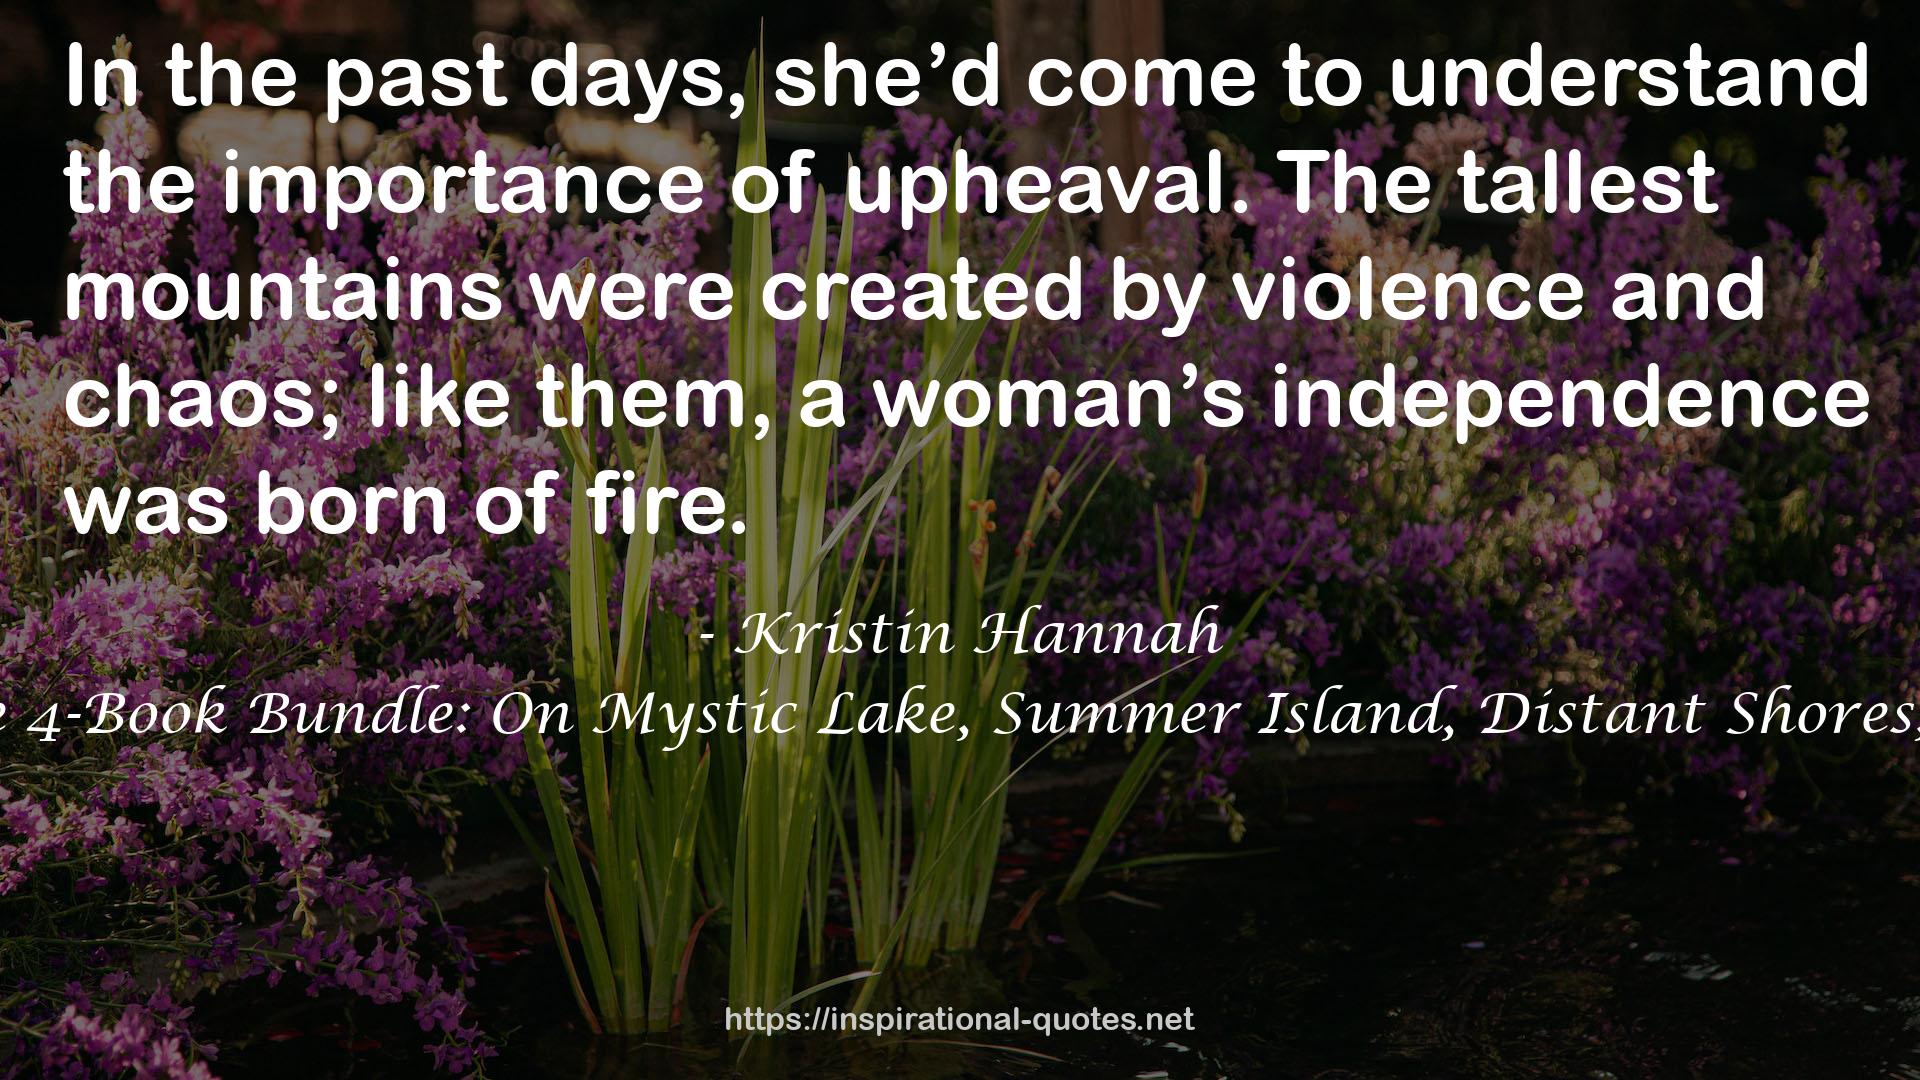 Coming Home 4-Book Bundle: On Mystic Lake, Summer Island, Distant Shores, Home Again QUOTES